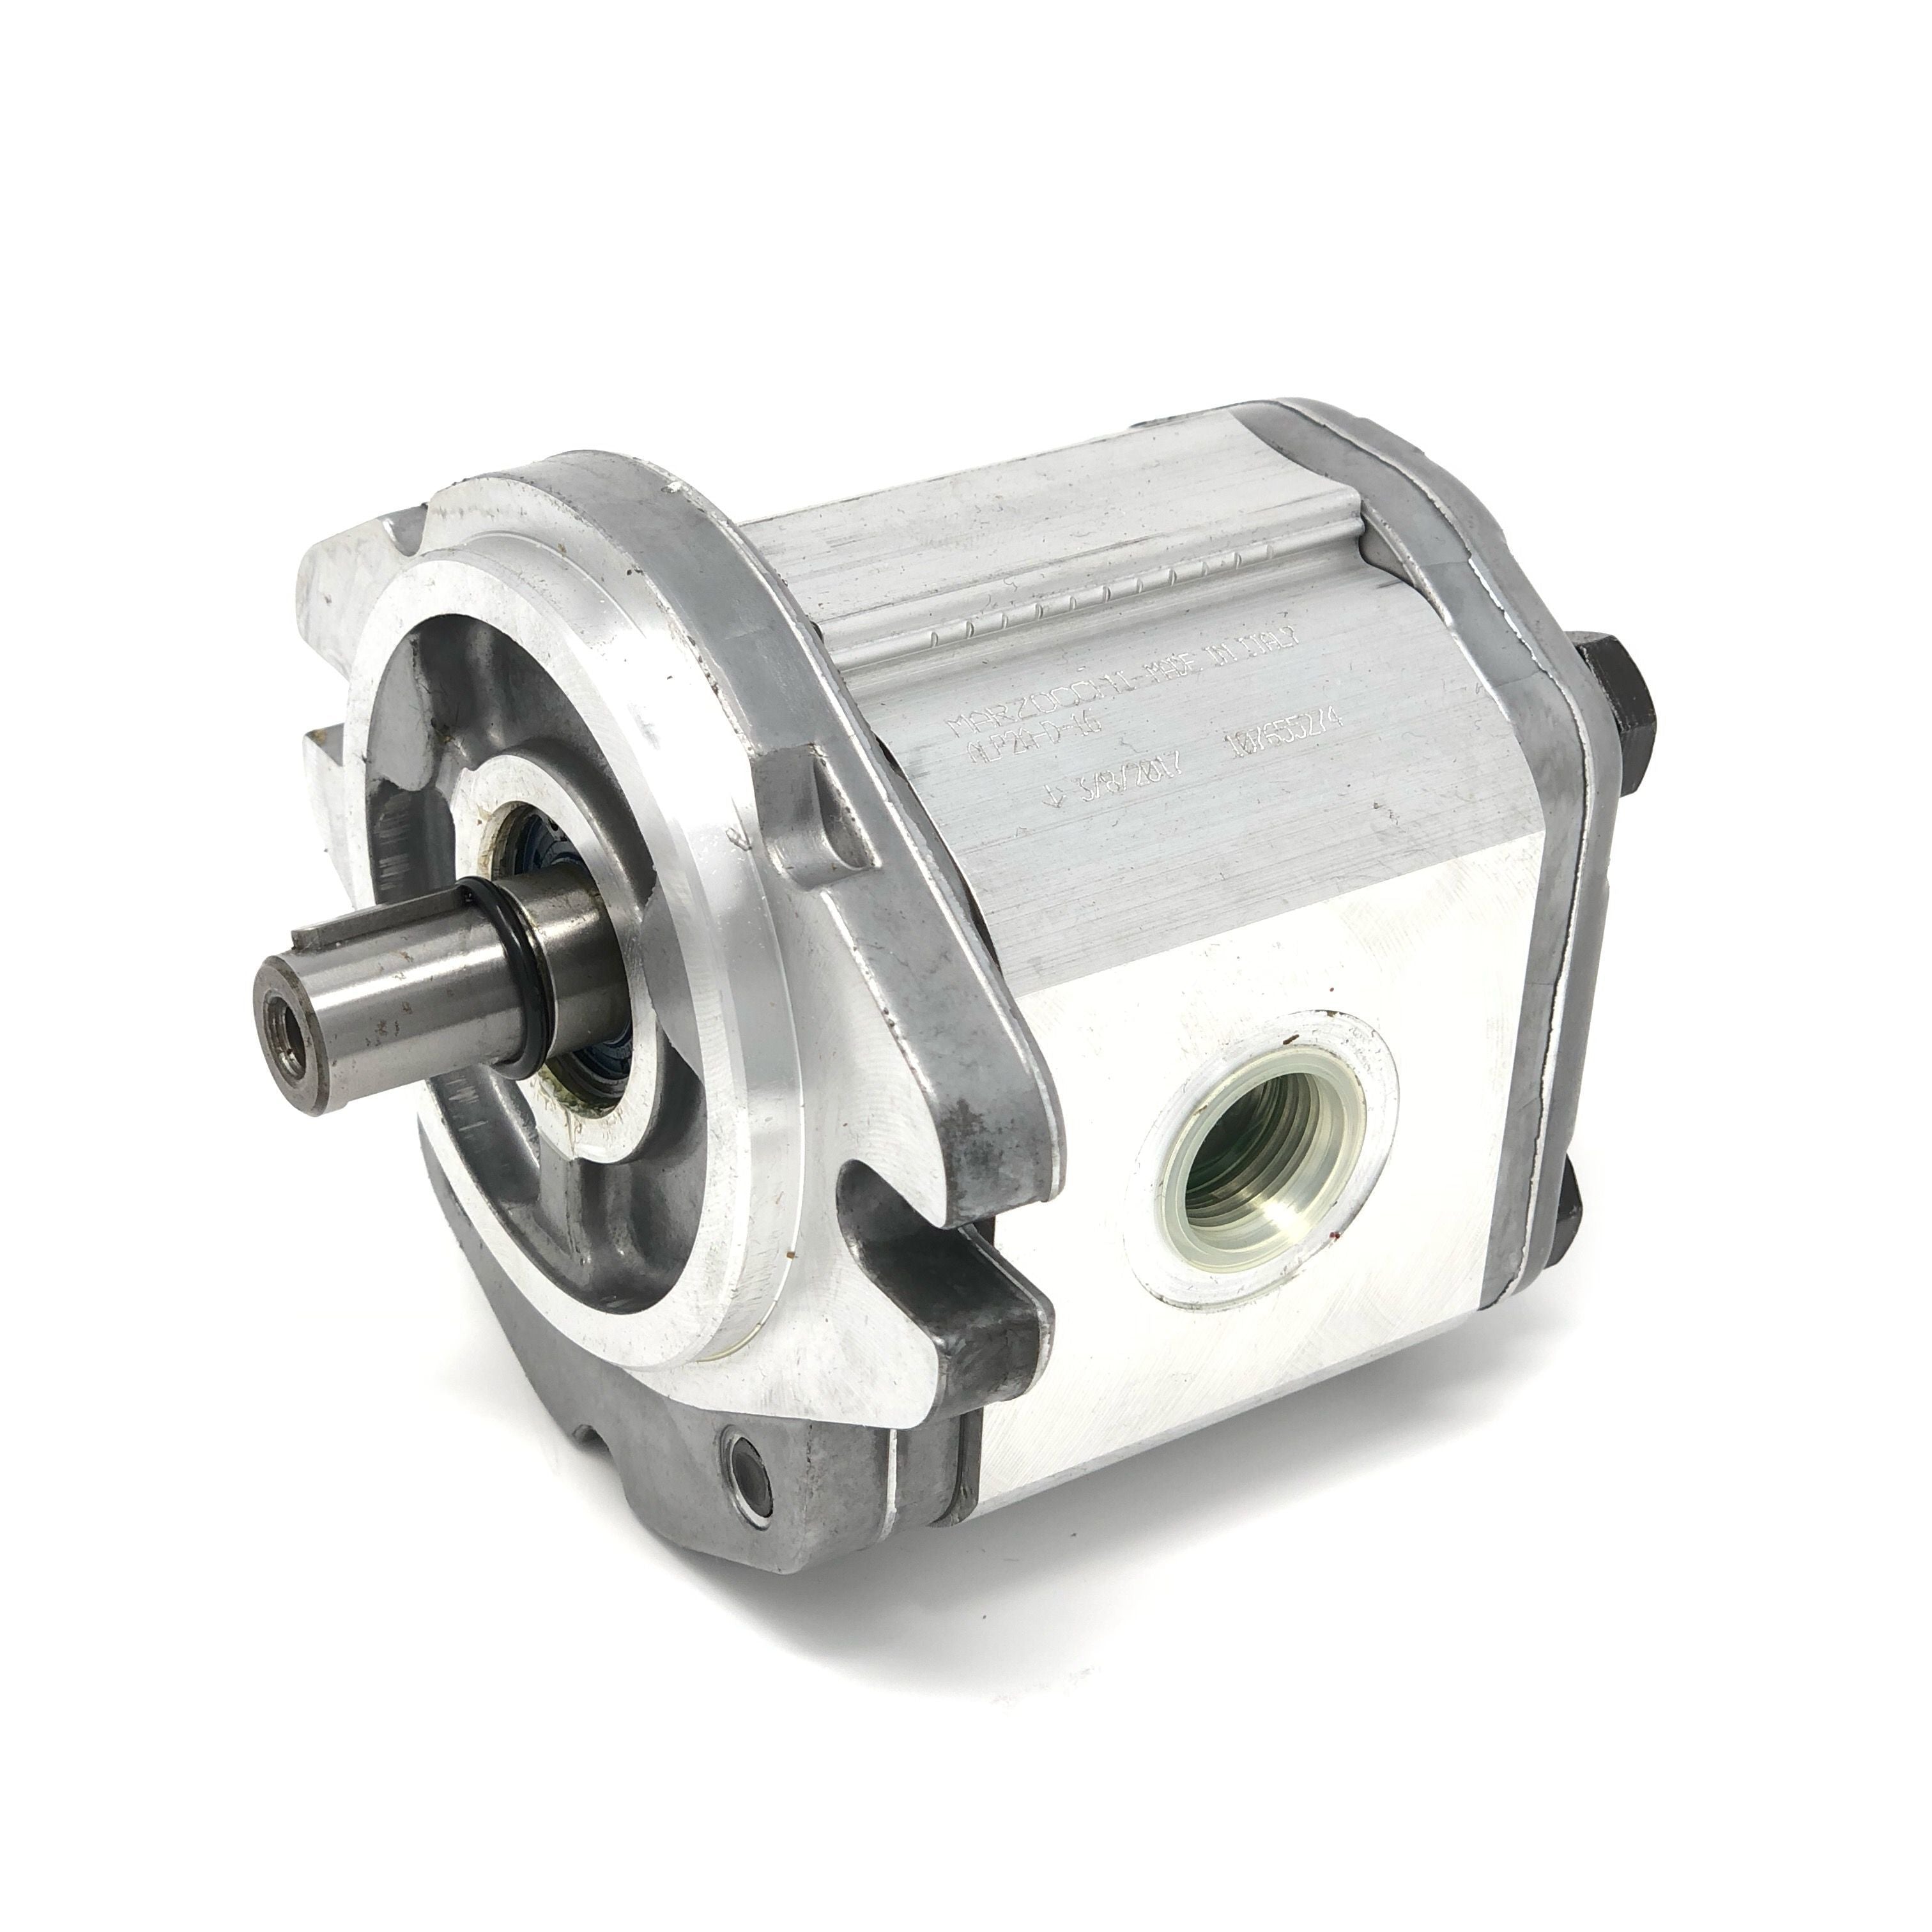 ALP1A-D-11 : Marzocchi Gear Pump, CW, 7.6cc (0.4636in3), 3.61 GPM, 2900psi, 3500 RPM, #10 SAE (5/8") In, #8 SAE (1/2") Out, Keyed Shaft 1/2" Bore x 1/8" Key, SAE AA 2-Bolt Mount